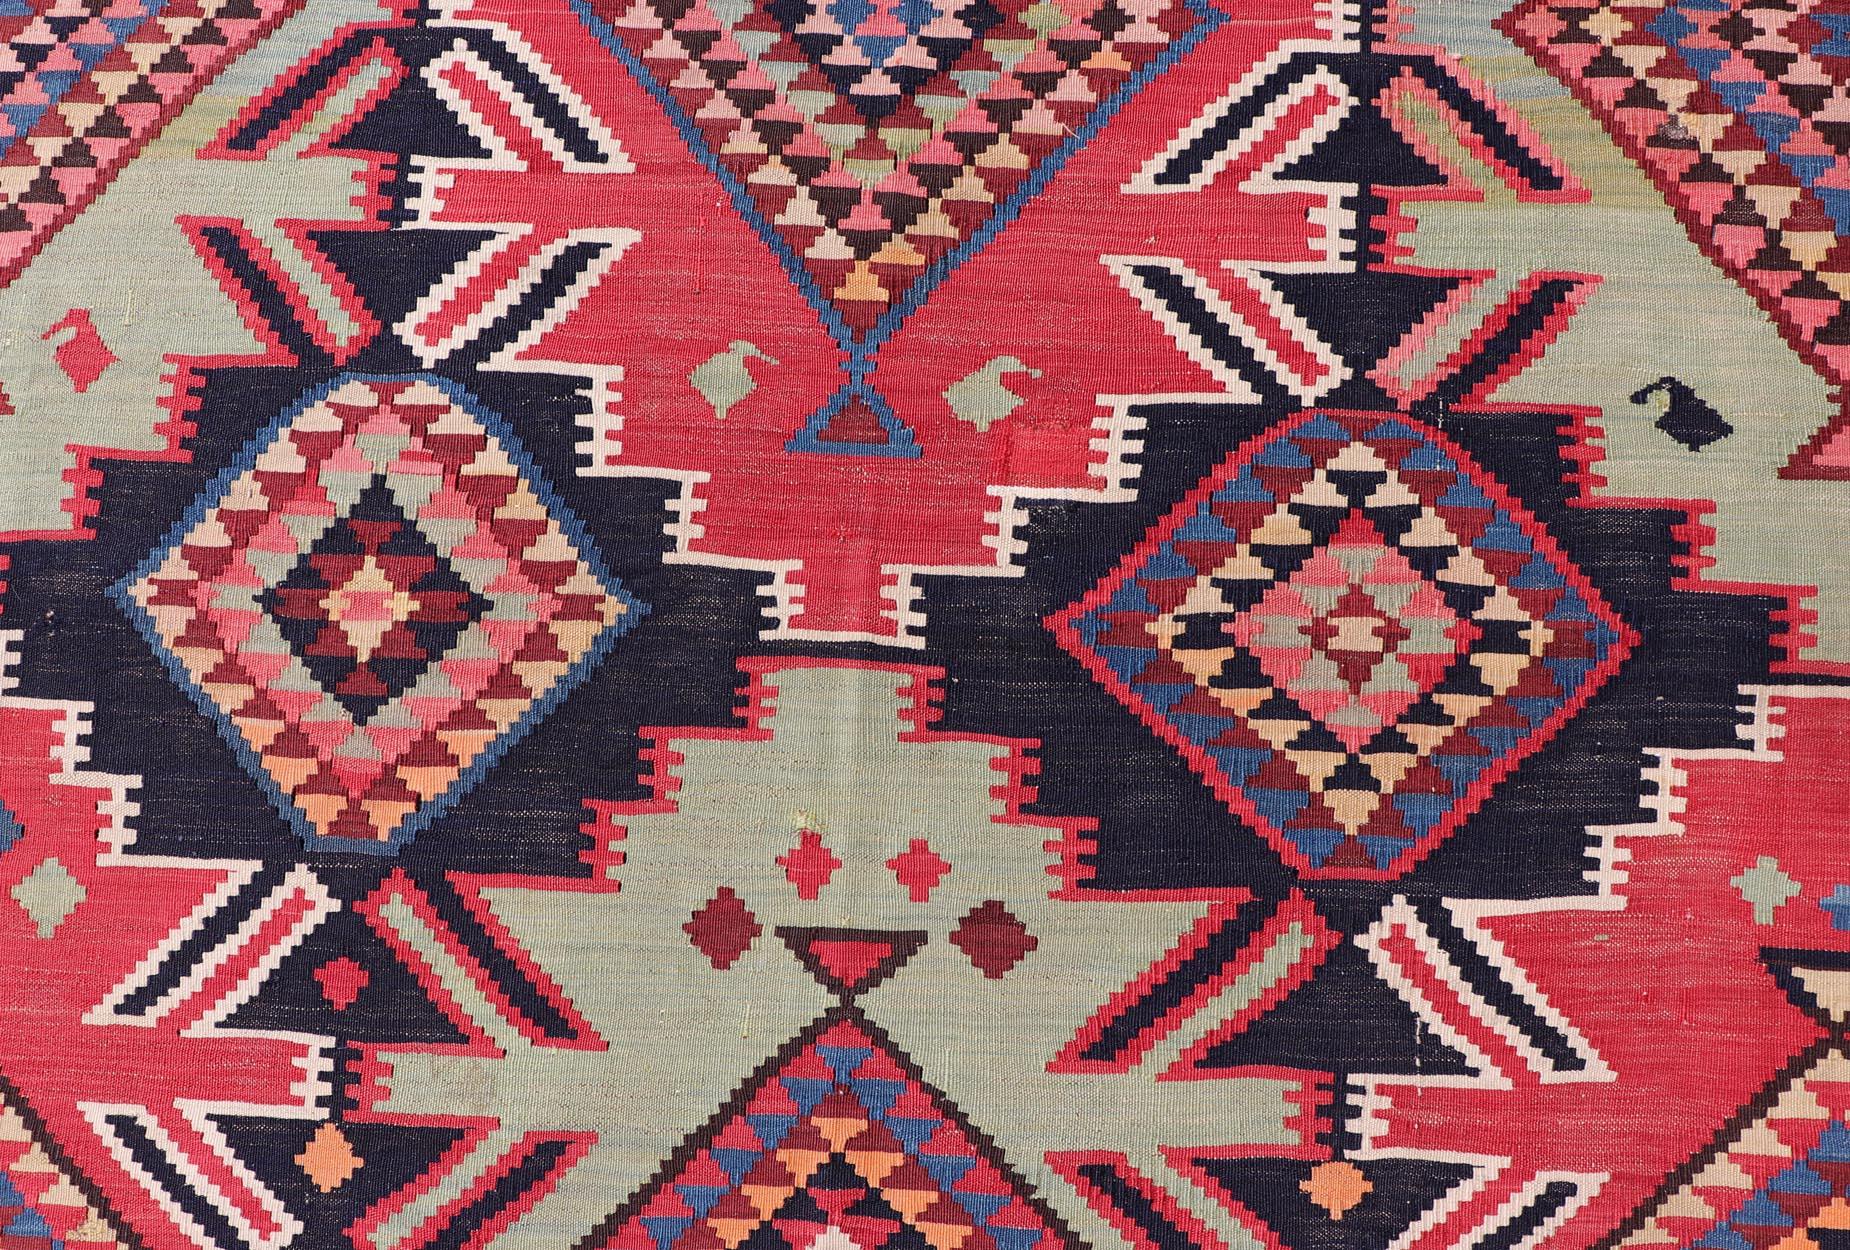 Antique Kuba Kilim Gallery Rug in with large scale Geometrics and Vibrant Colors, 19th century. Keivan Woven Arts / rug R20-1203, country of origin / type: Caucasus/ Kuba , circa 1890

Measures: 6'0 x 12'8 

This beautiful late 19th century